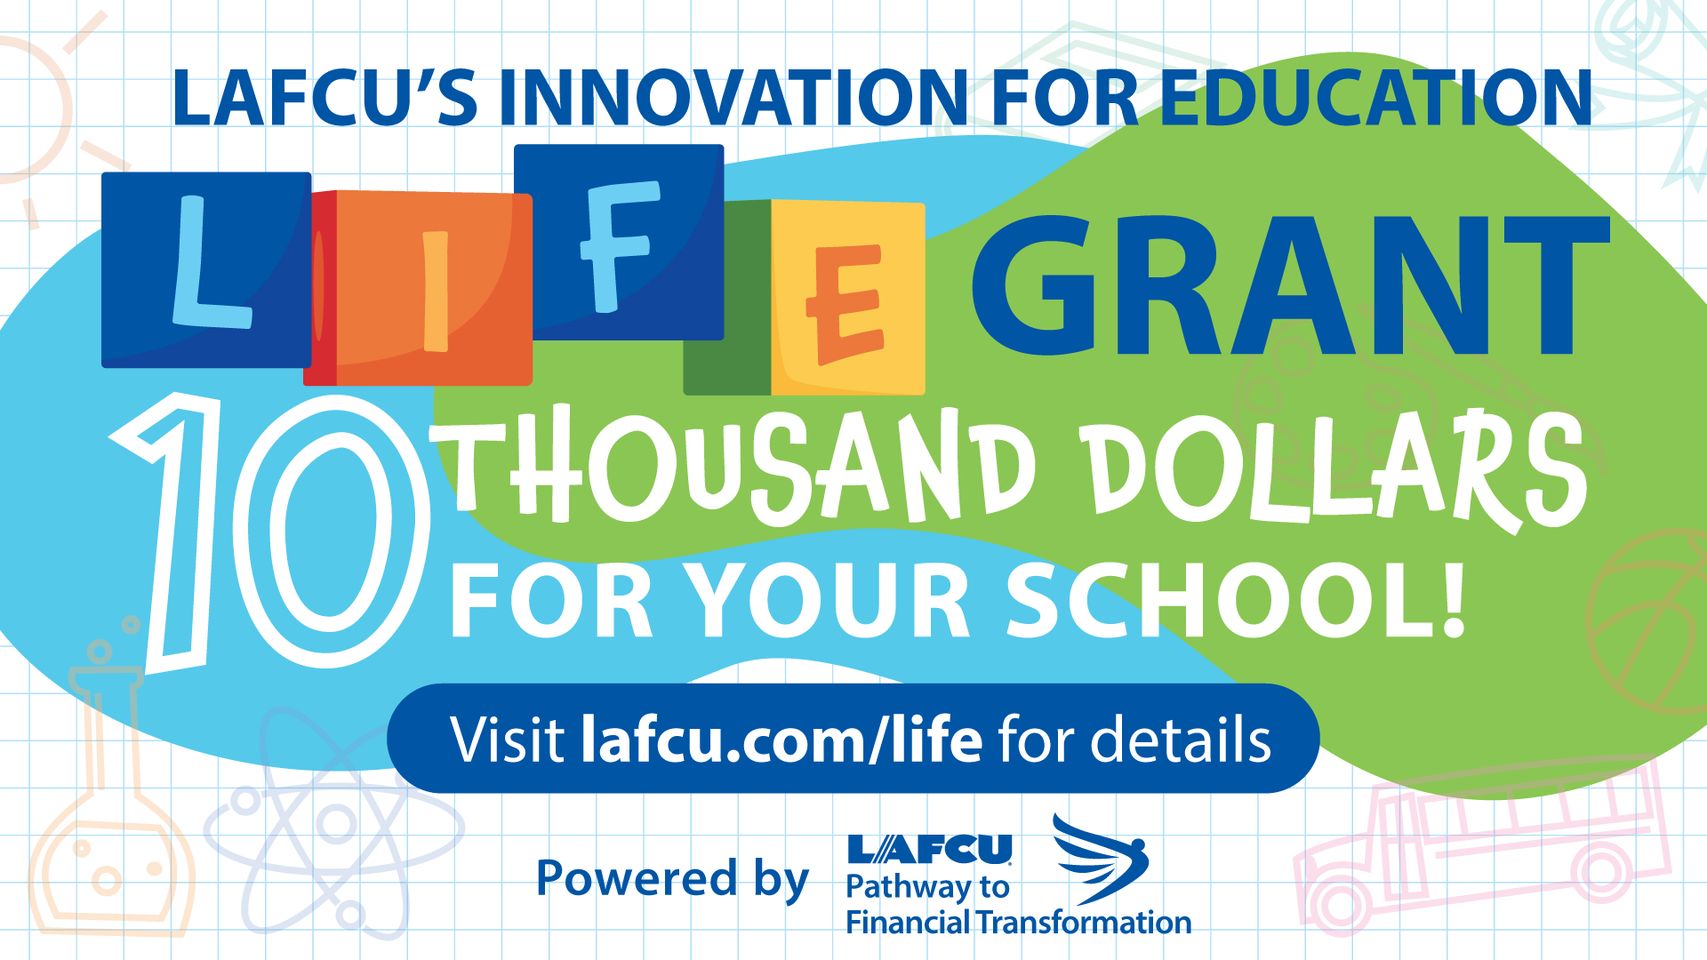 LAFCU Innovation for Education Grant graphic